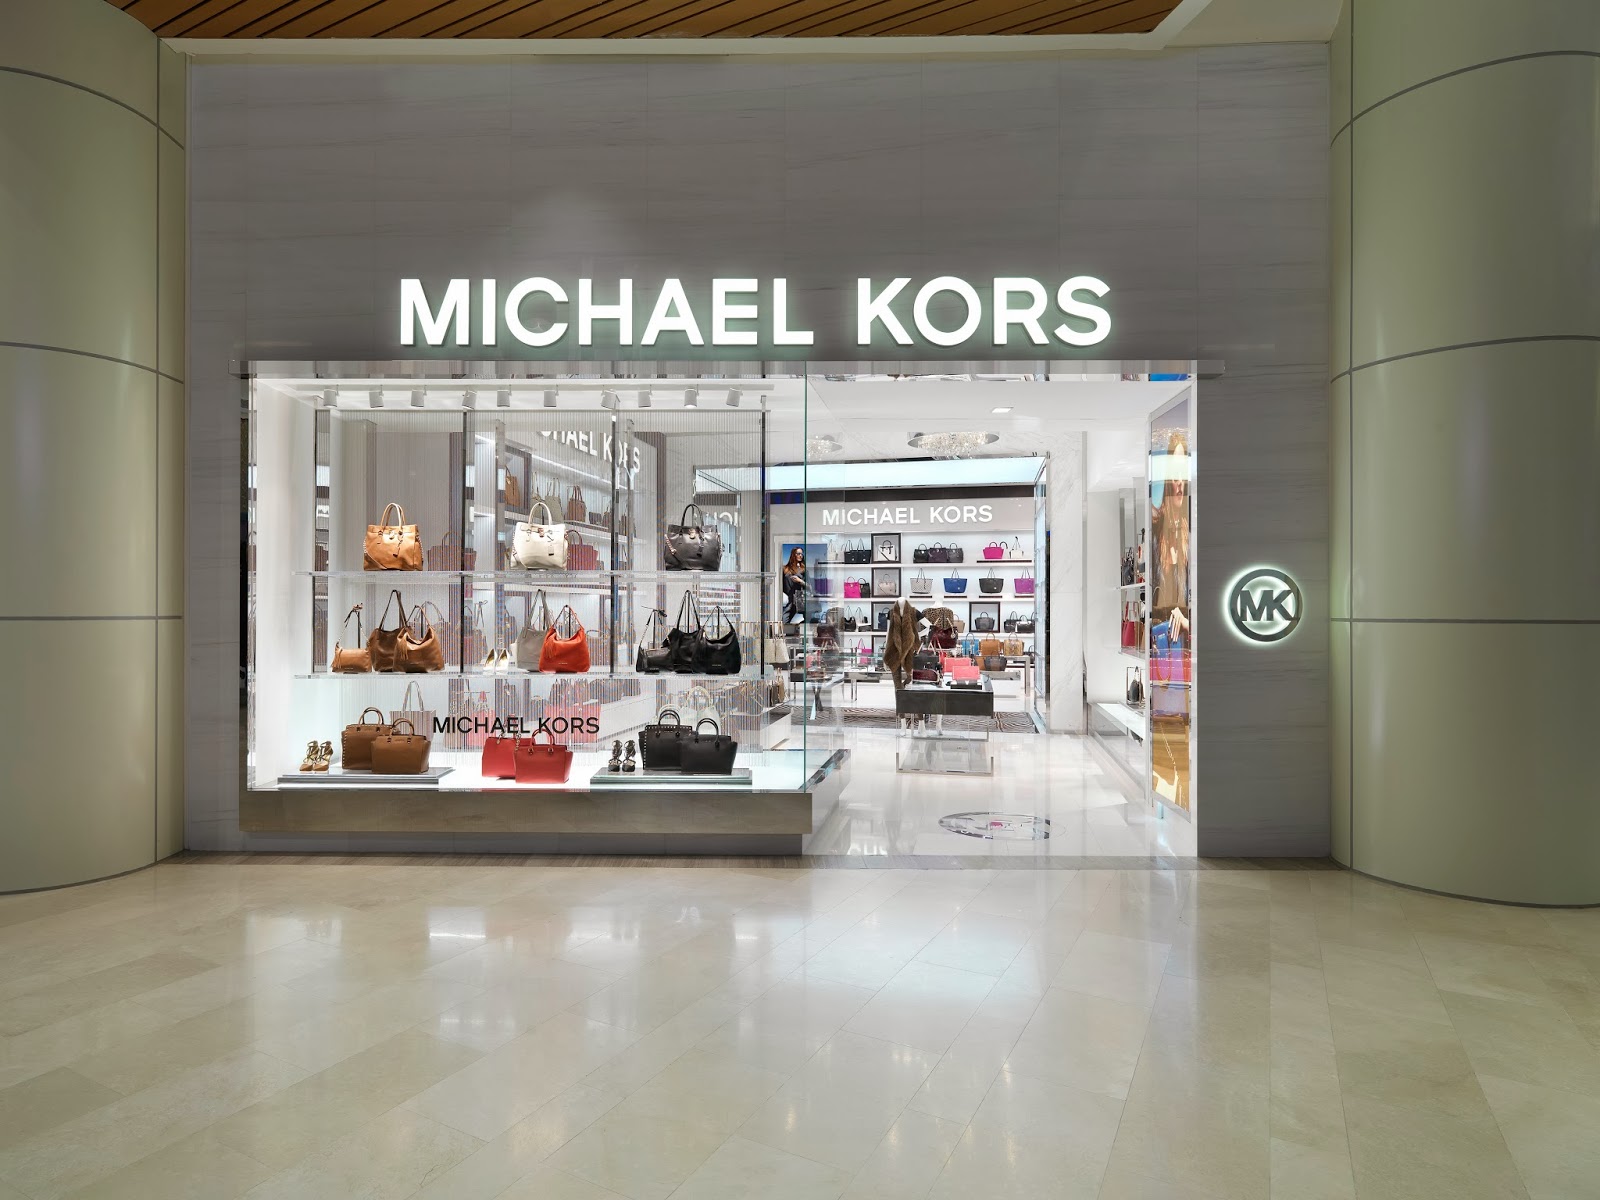 Michael Kors To Open Its 1st Lifestyle Store In Penang ~ Huney'Z World